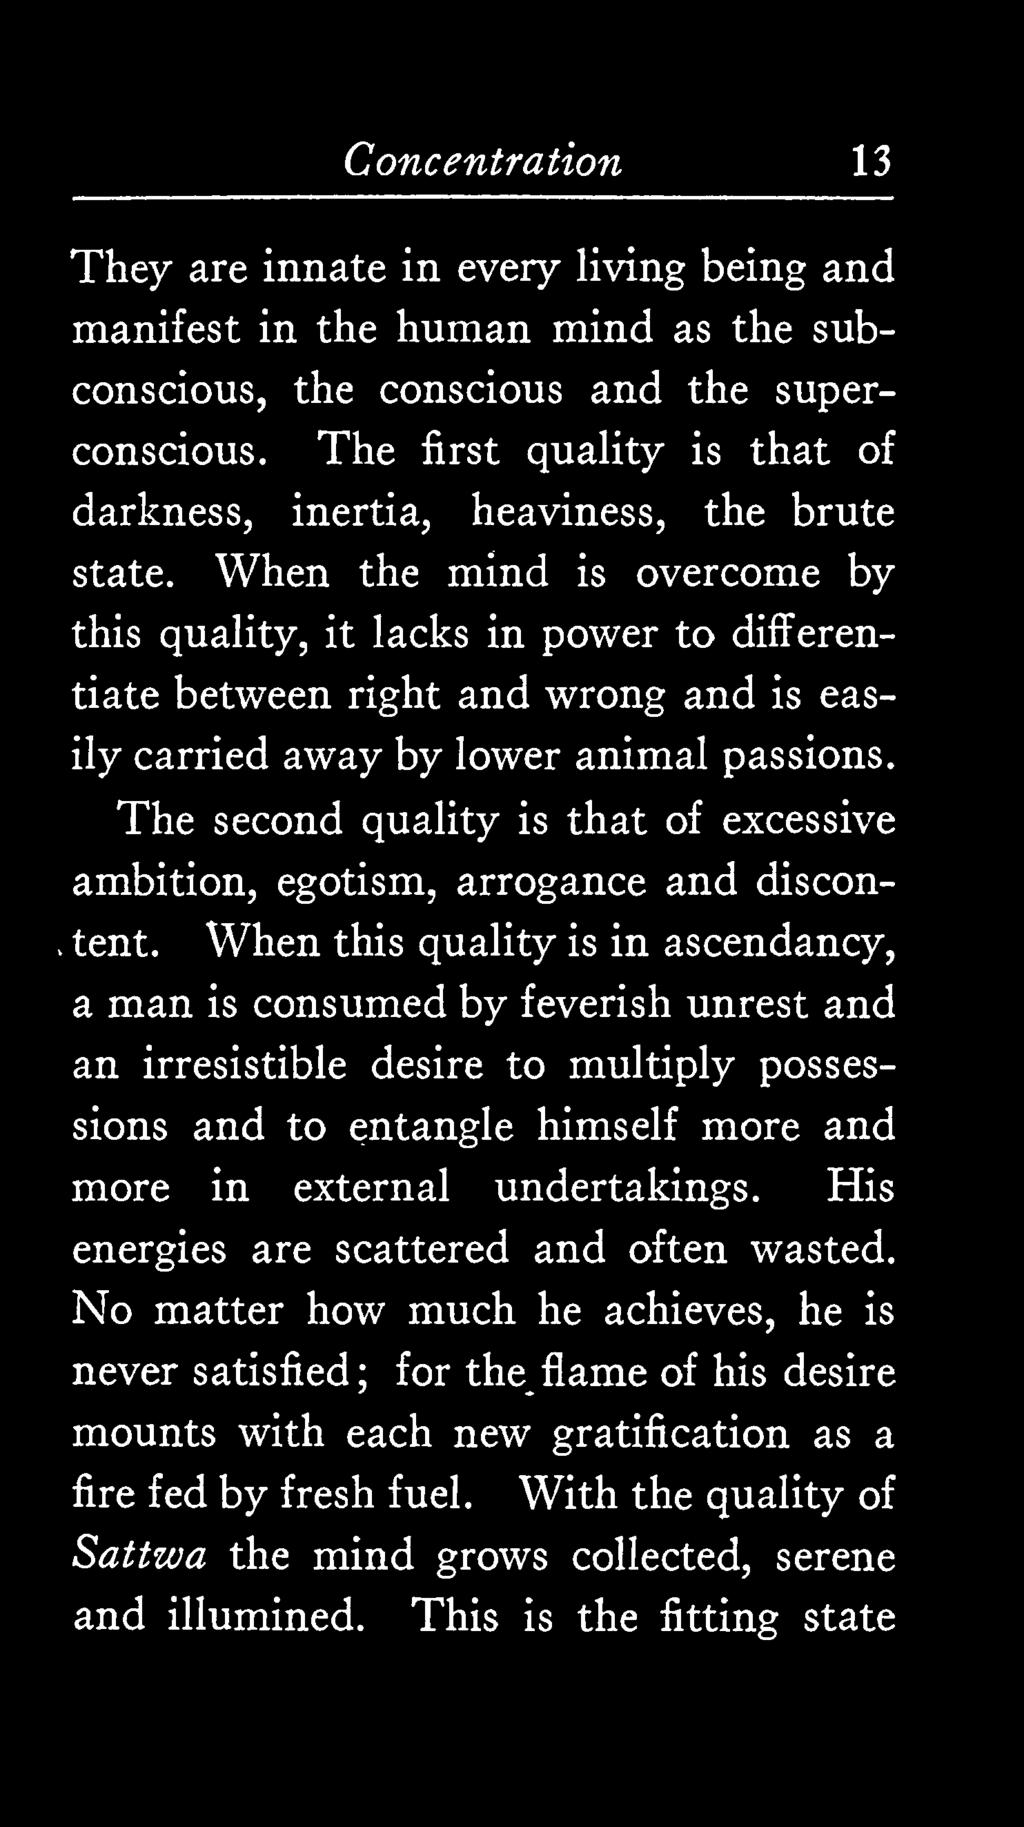 When the mind is overcome by this quality, it lacks in power to differentiate between right and wrong and is easily carried away by lower animal passions.